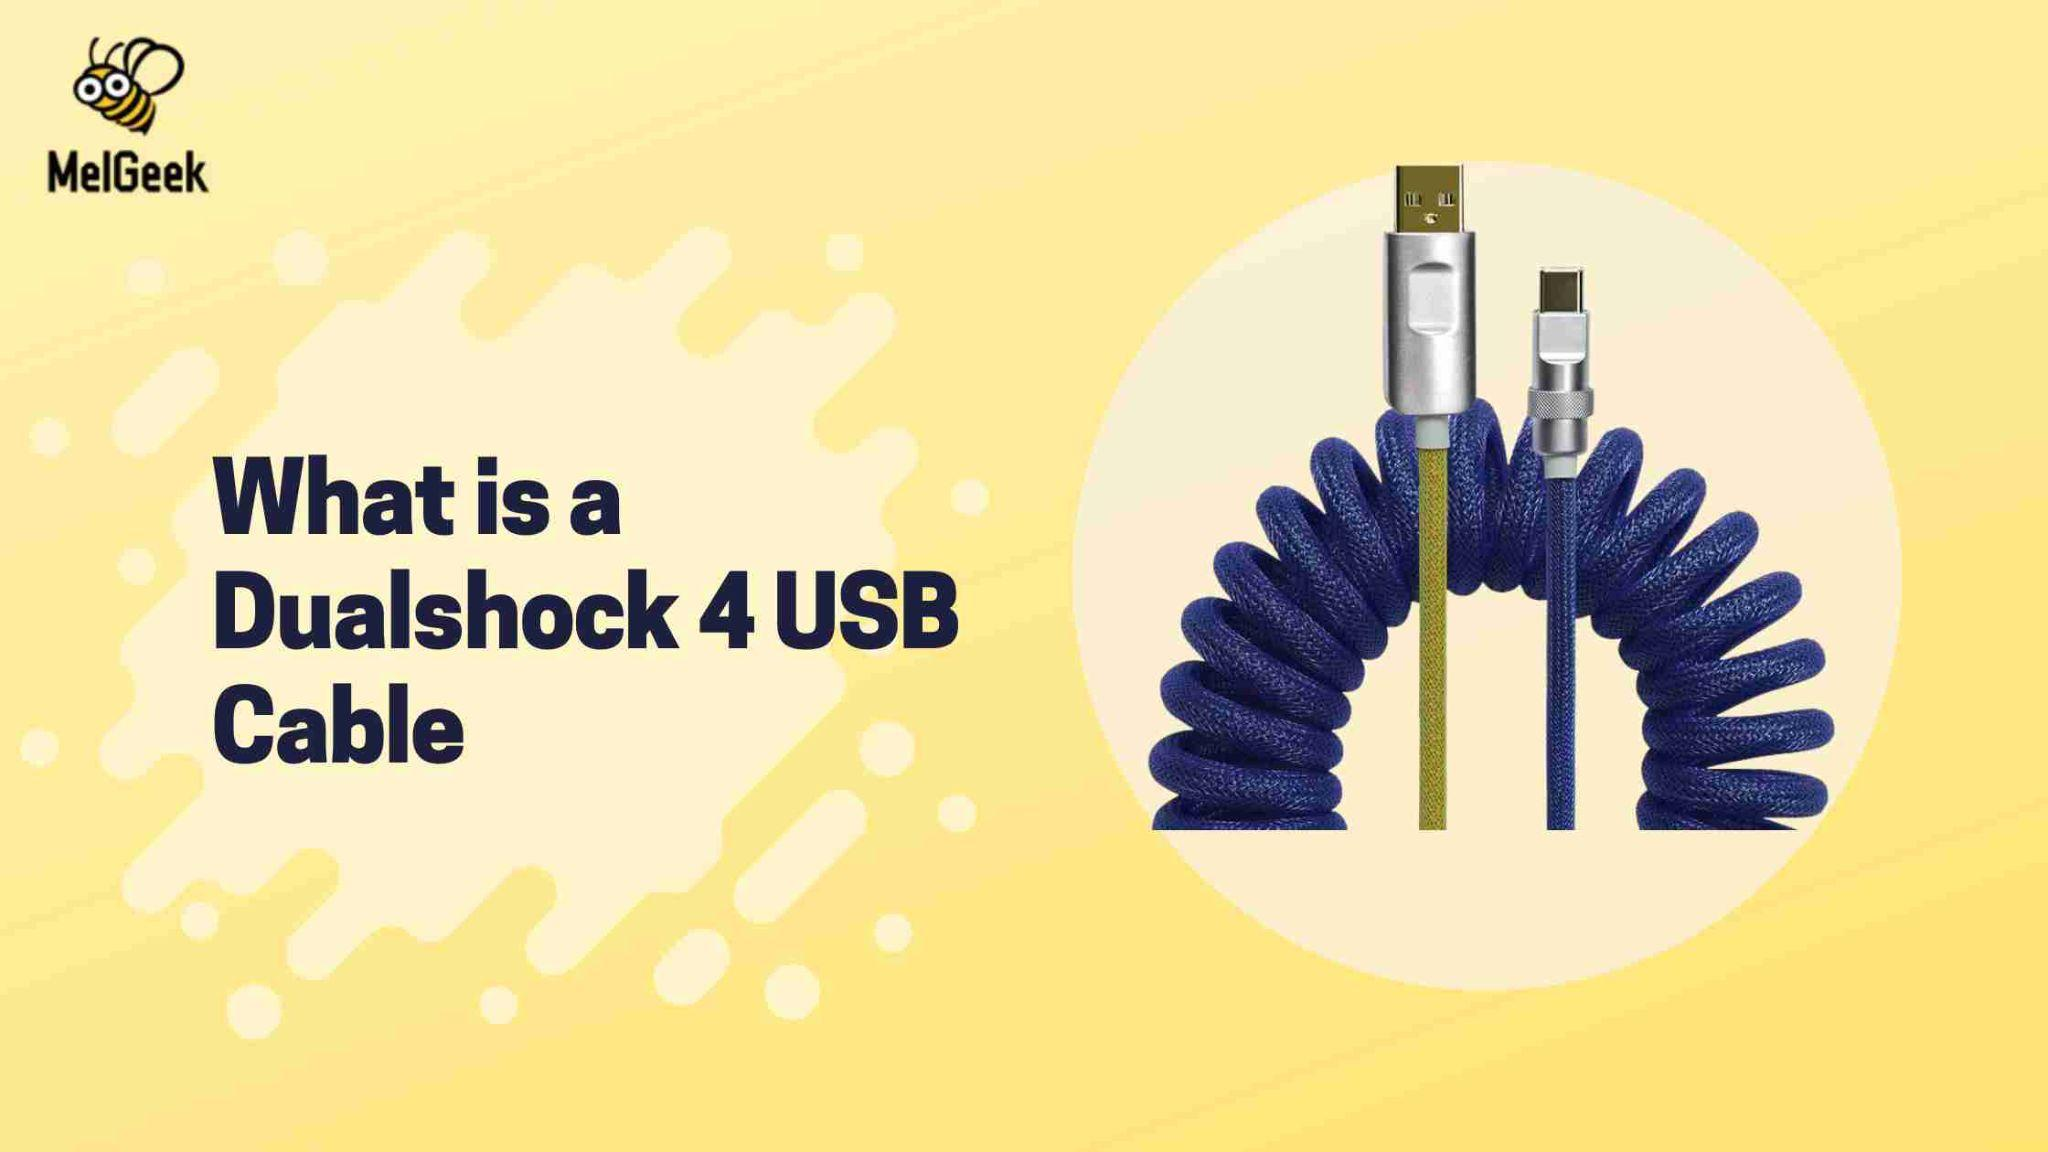 What is a dualshock 4 usb cable